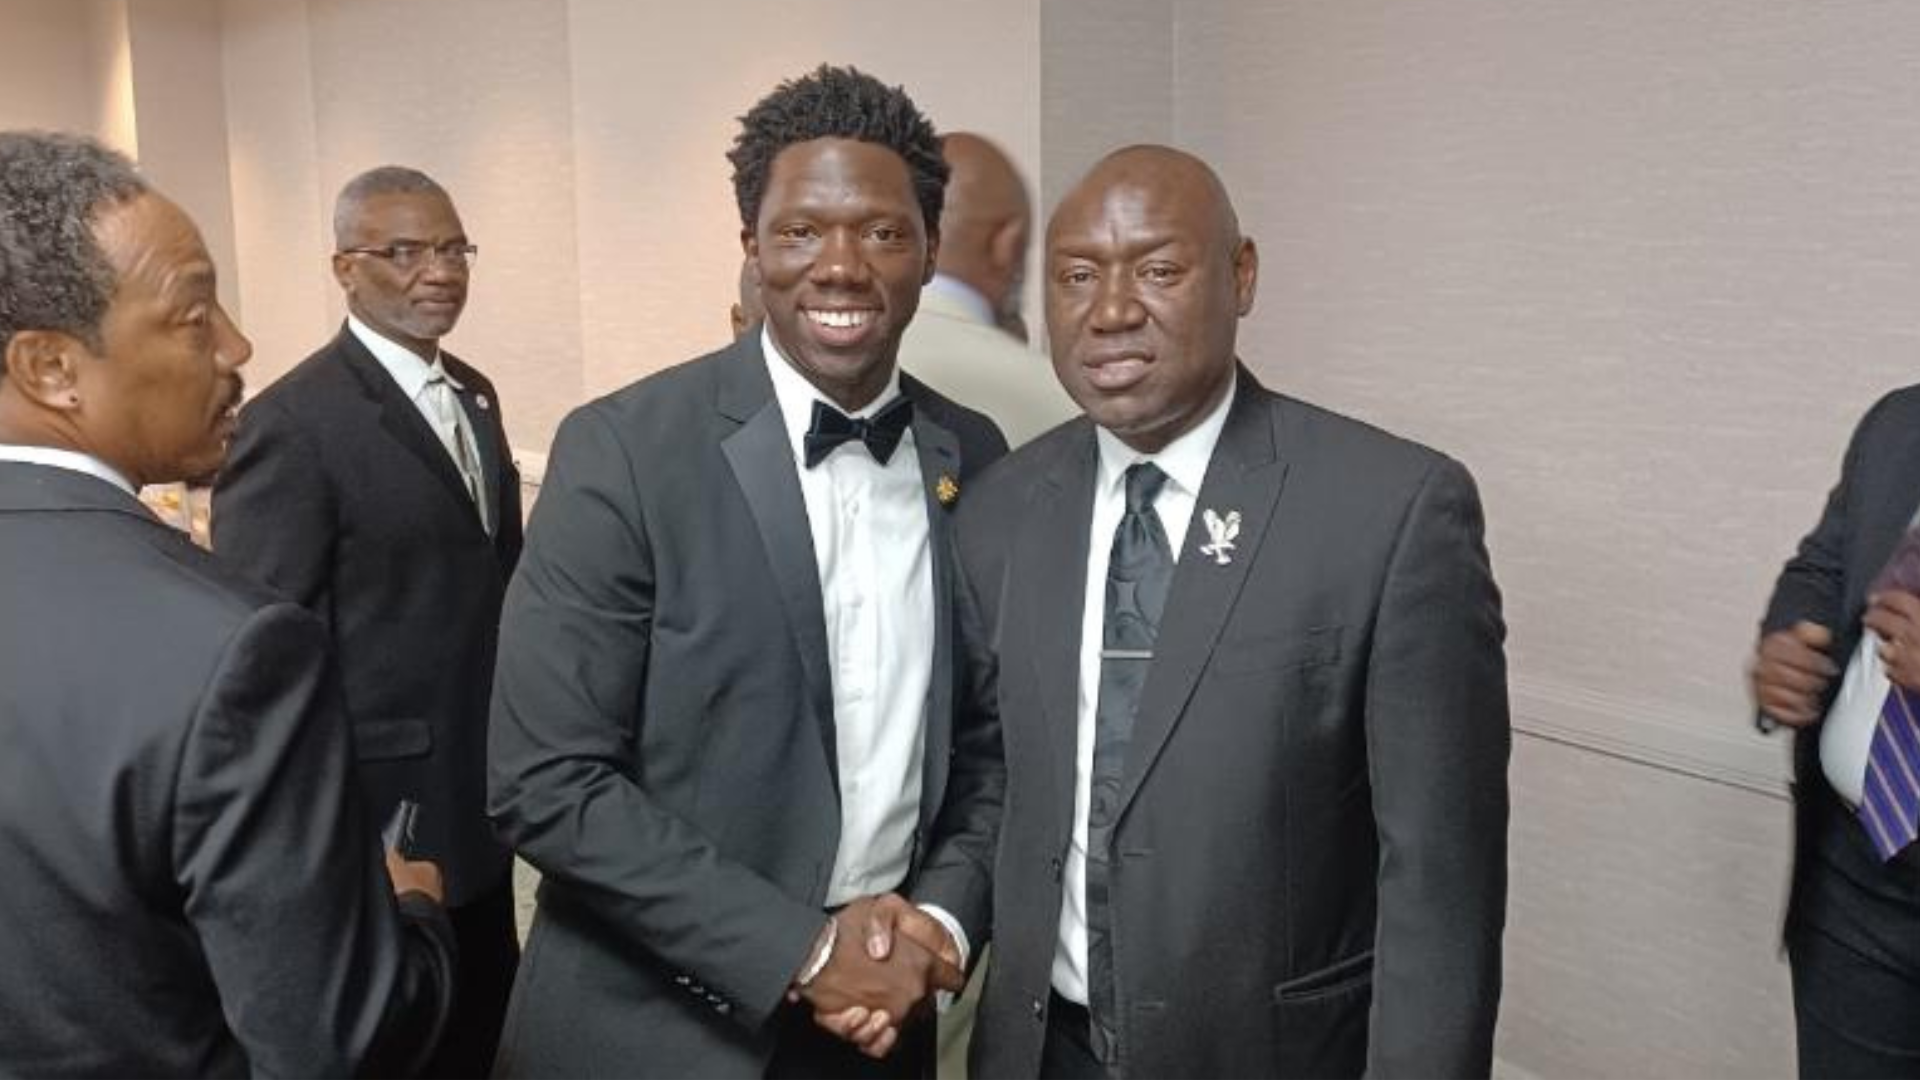 Marcus Brooks (left) with attorney Ben Crump at the St. Petersburg NAACP Freedom Fund Gala